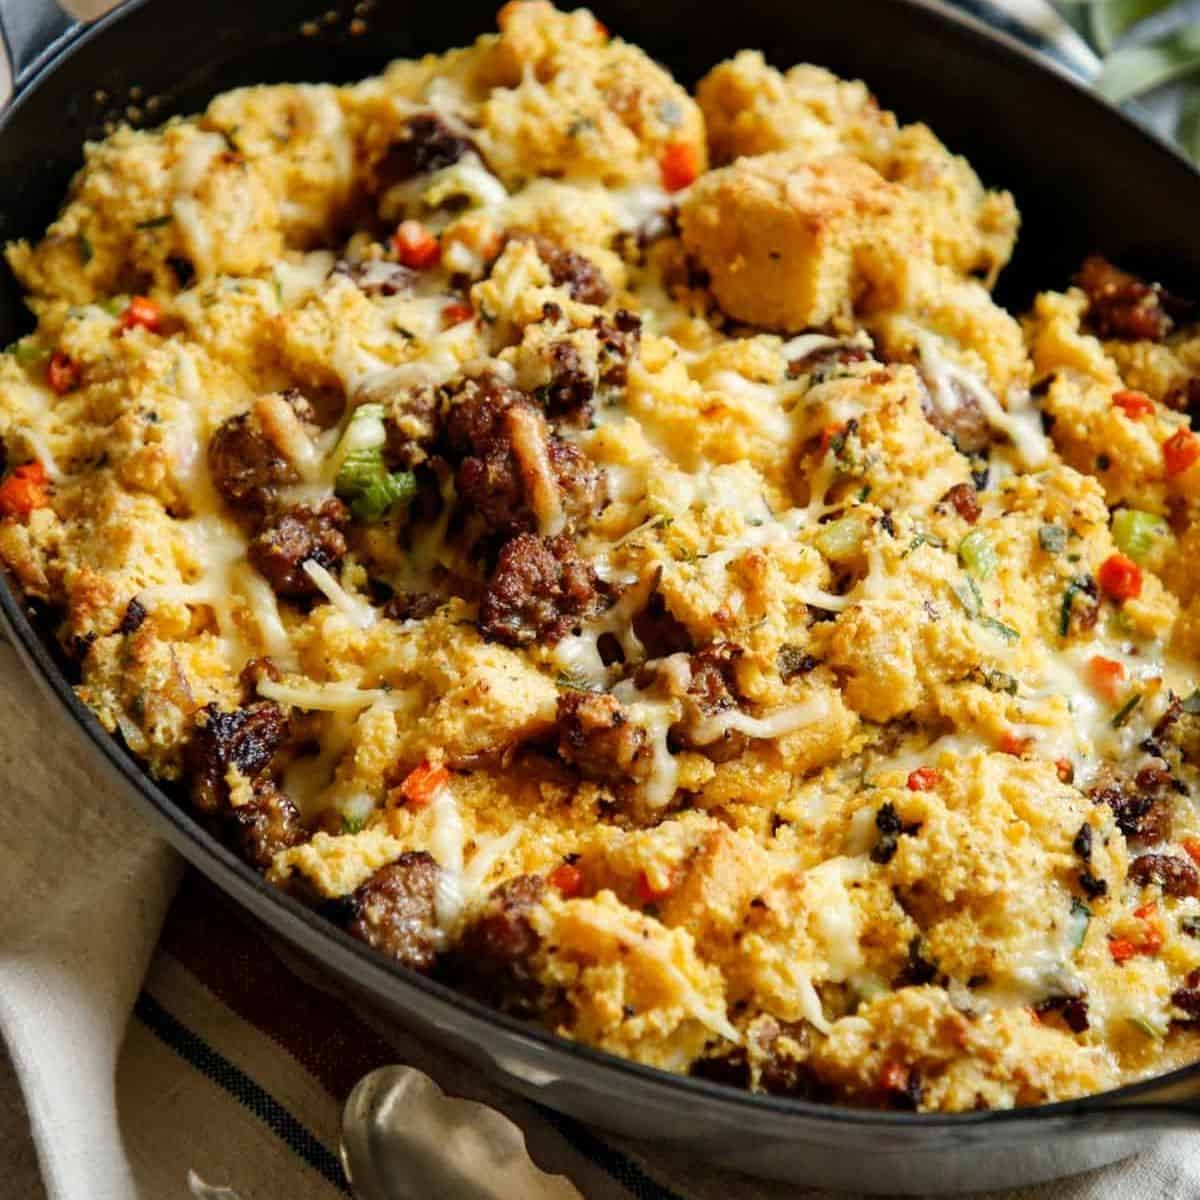 Cornbread Stuffing with Sausage in a gratin dish